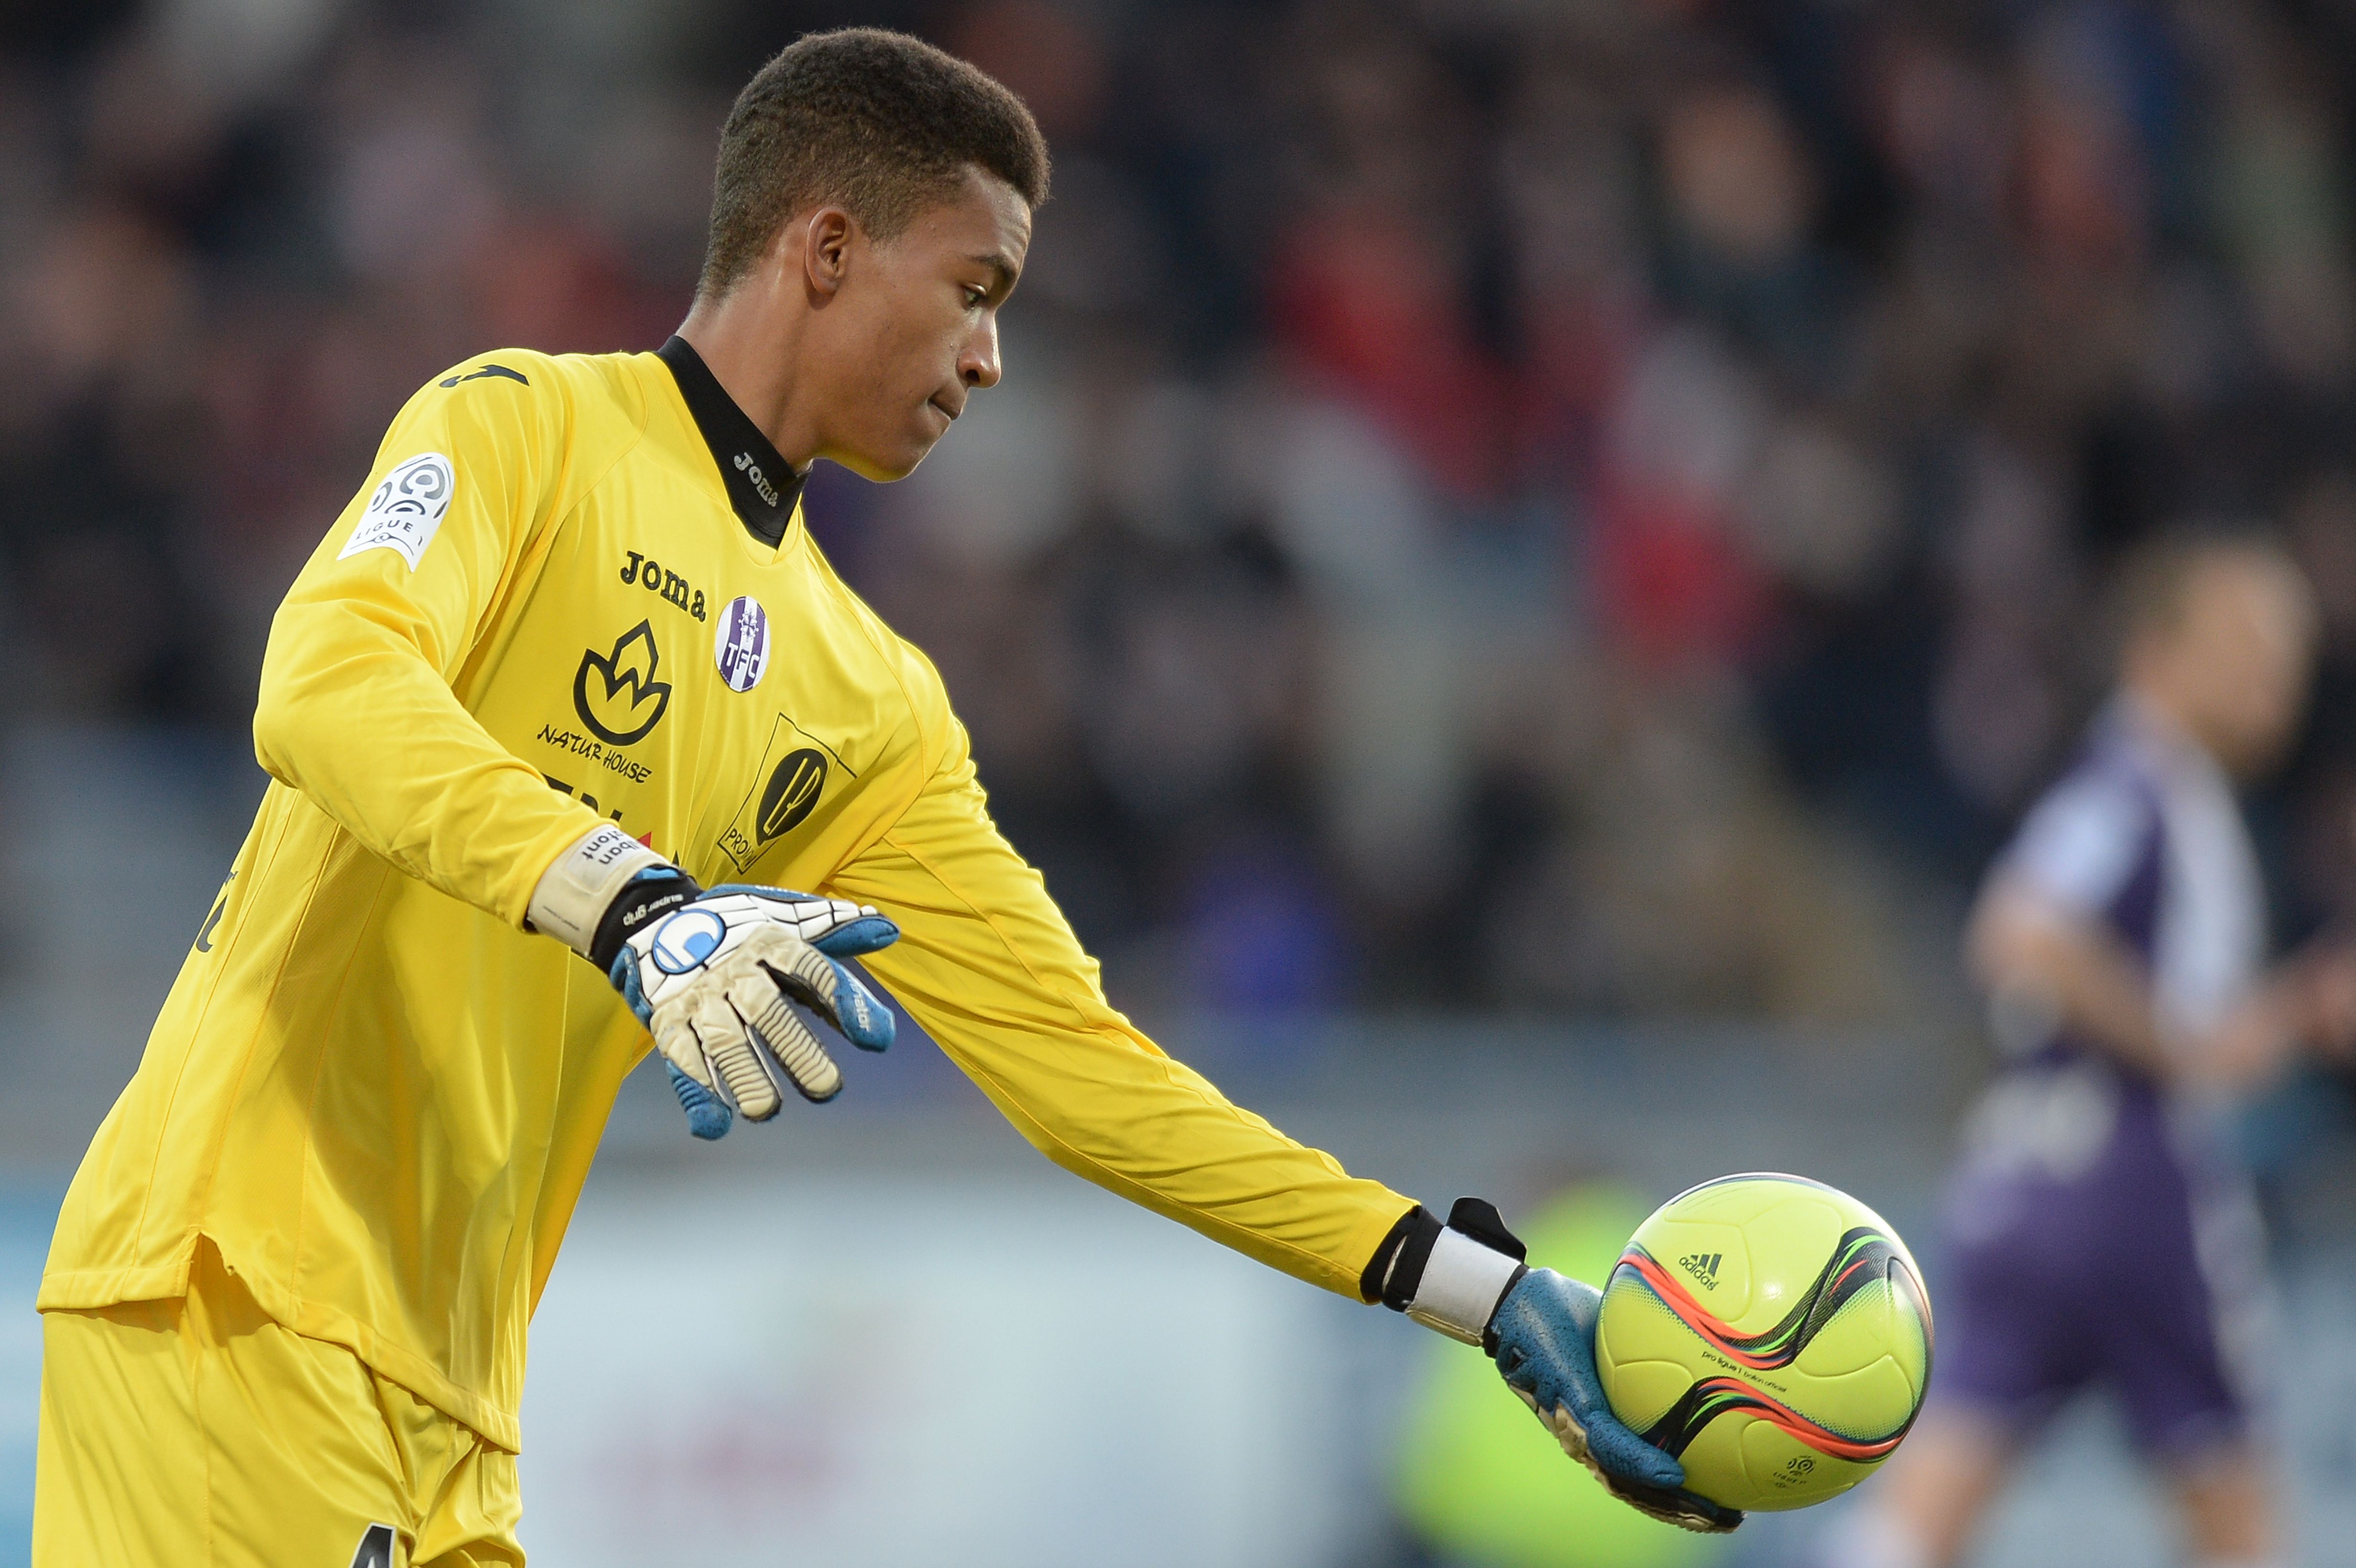 Toulouse's French goalkeeper Alban Lafont throws the ball during the French L1 football match between Lorient and Toulouse on April 16, 2016 at the Moustoir stadium in Lorient, western France. AFP / JEAN-SEBASTIEN EVRARD / AFP / JEAN-SEBASTIEN EVRARD        (Photo credit should read JEAN-SEBASTIEN EVRARD/AFP/Getty Images)